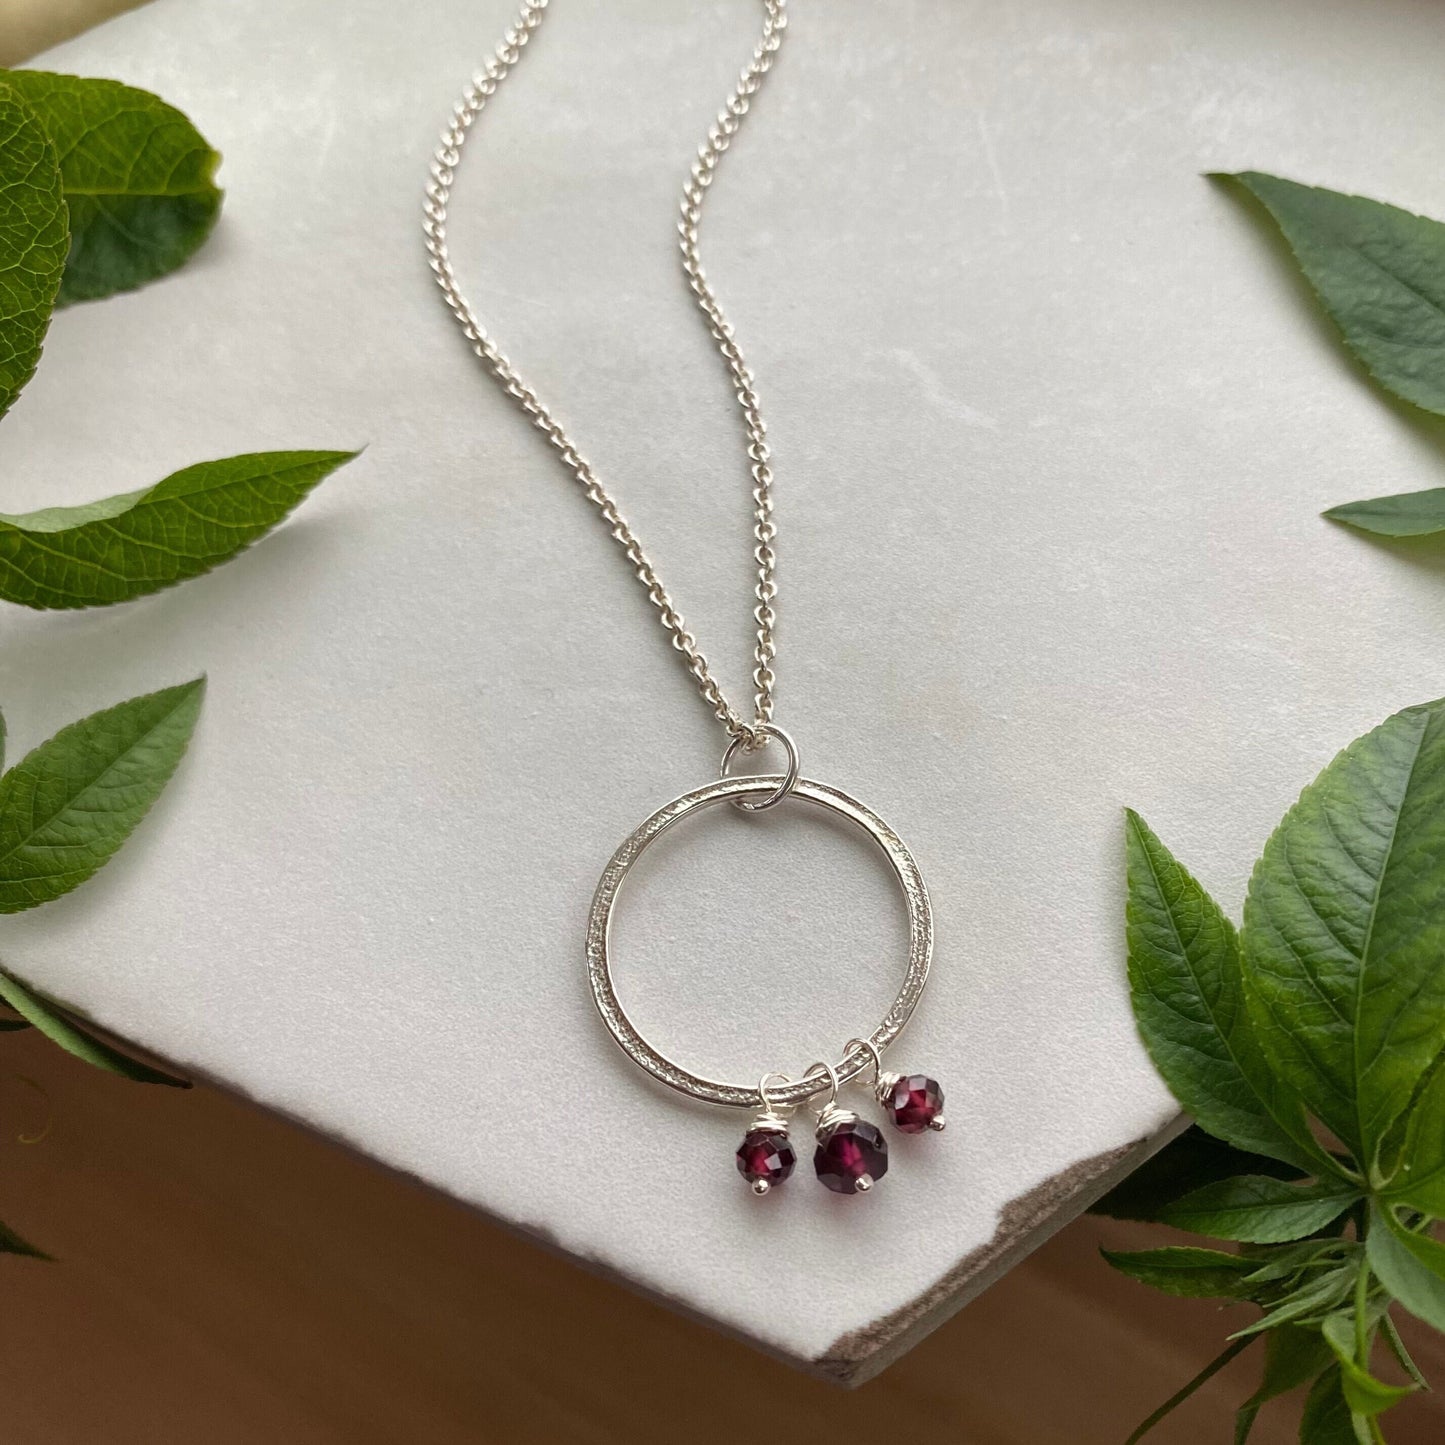 Gemstone Charm Necklace - Bold Version, Sterling Silver Sparkly Perfectly Imperfect Circles Pendant with Choice of Gemstone Birthstones